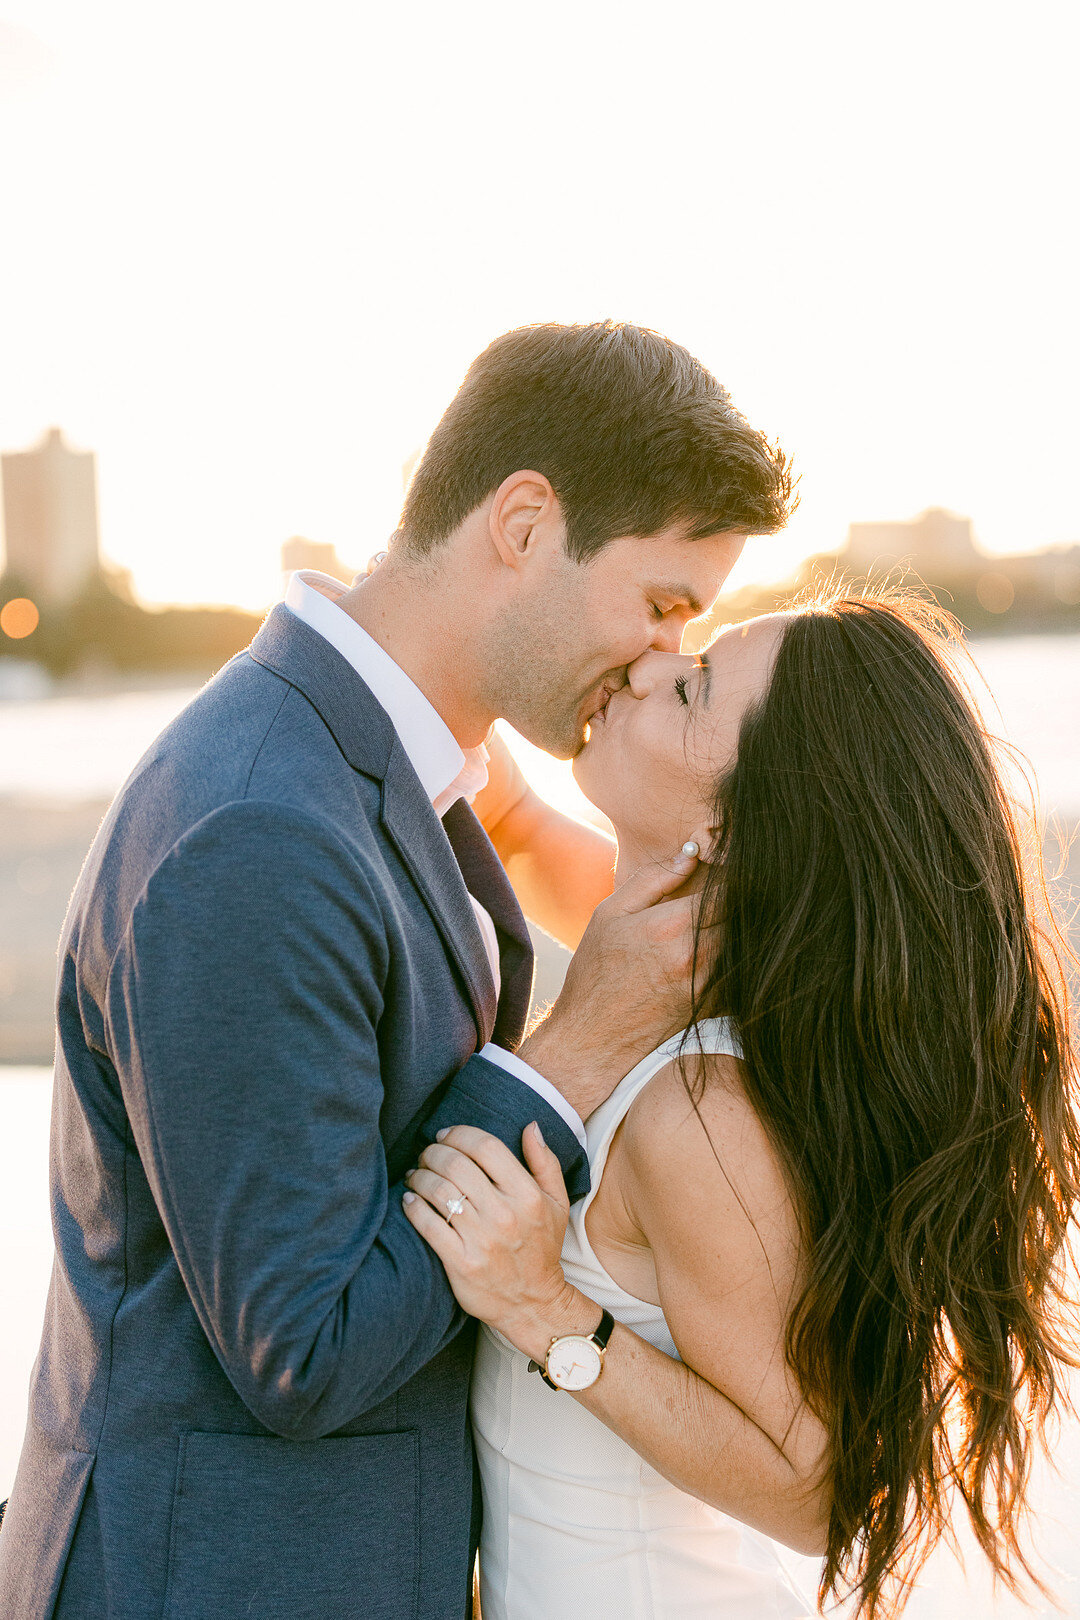  Effortlessly Chic Chicago Engagement captured by The Fourniers Fine Art Photography